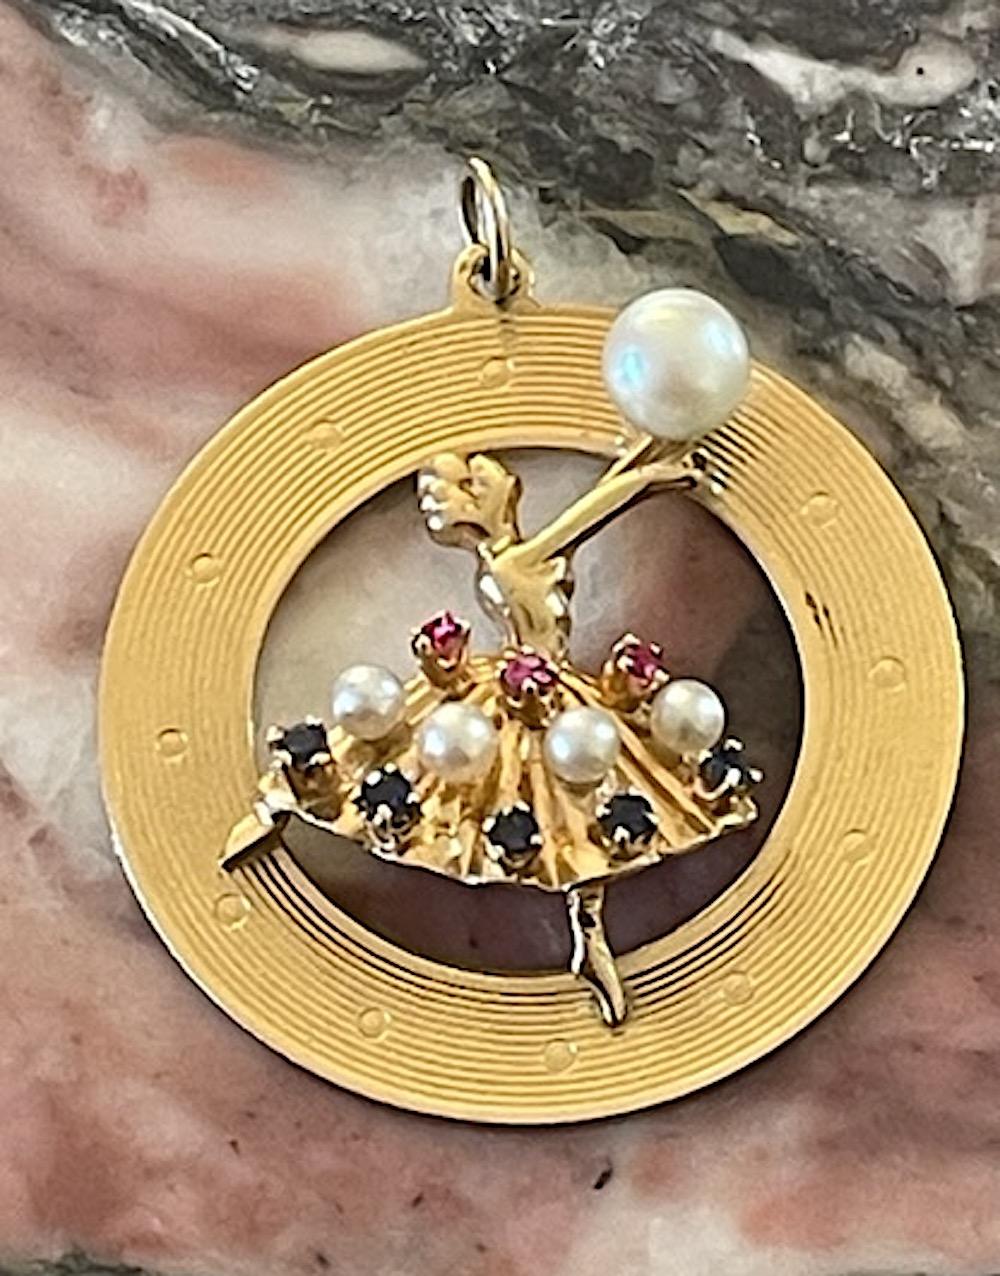 Engine turned discs are highly coveted. This fabulous vintage engine turned dancer charm is no exception. It's perfect for a long necklace chain or  hanging from a chic, statement charm bracelet.

14k Yellow Gold and set with pearls and blue and